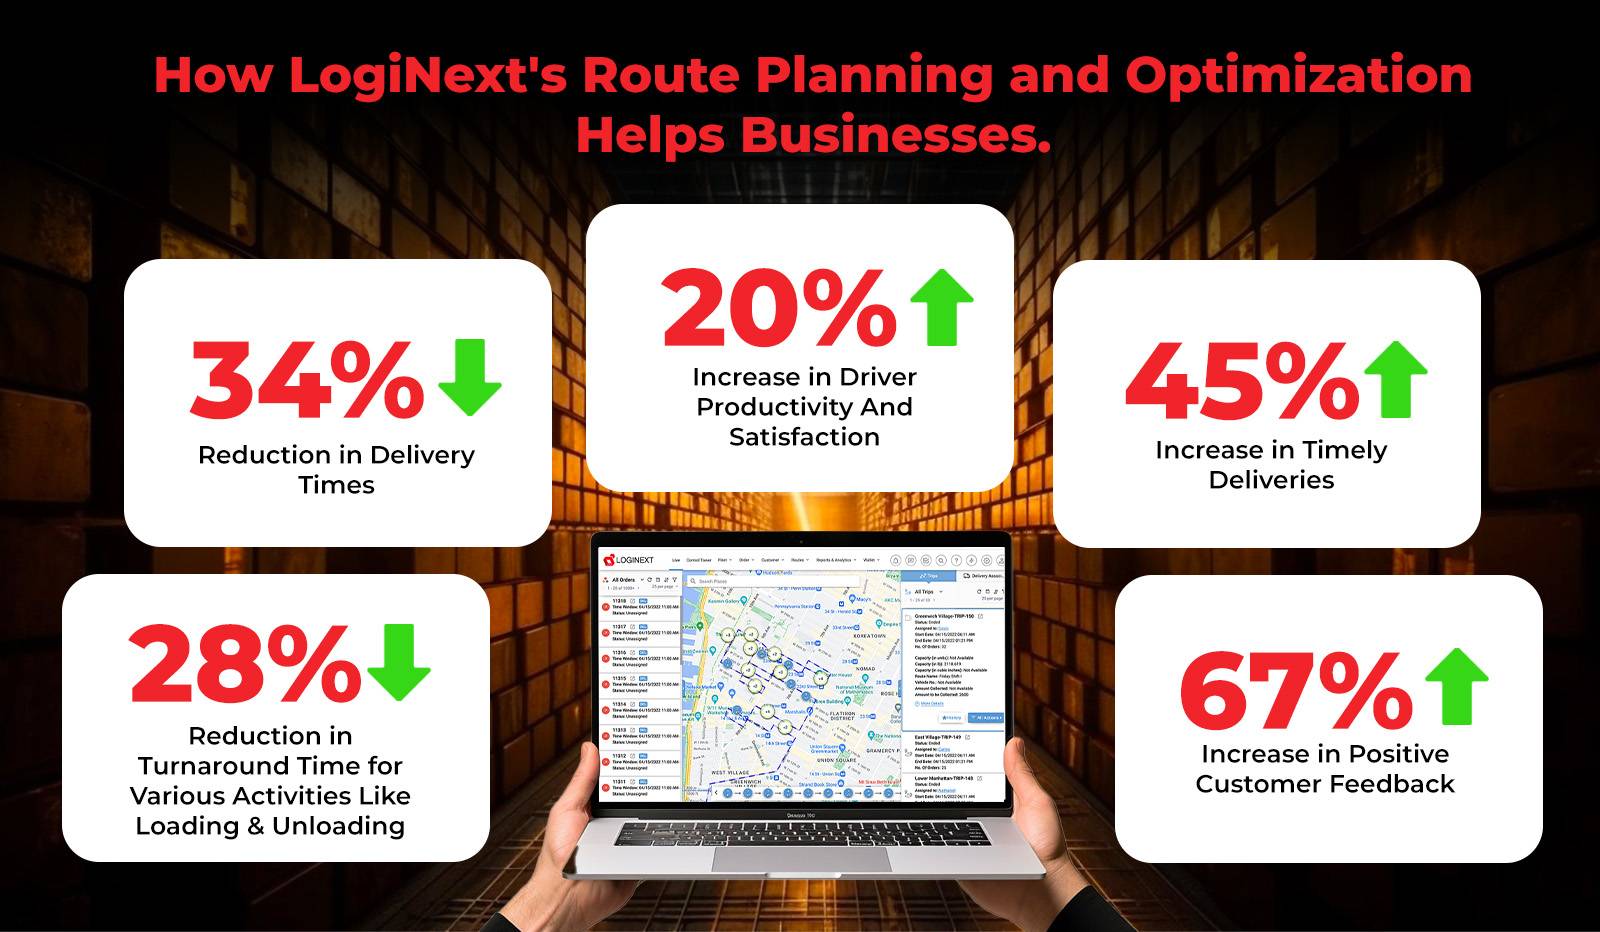 How LogiNext's Route Planning and Optimization Software helps businesses